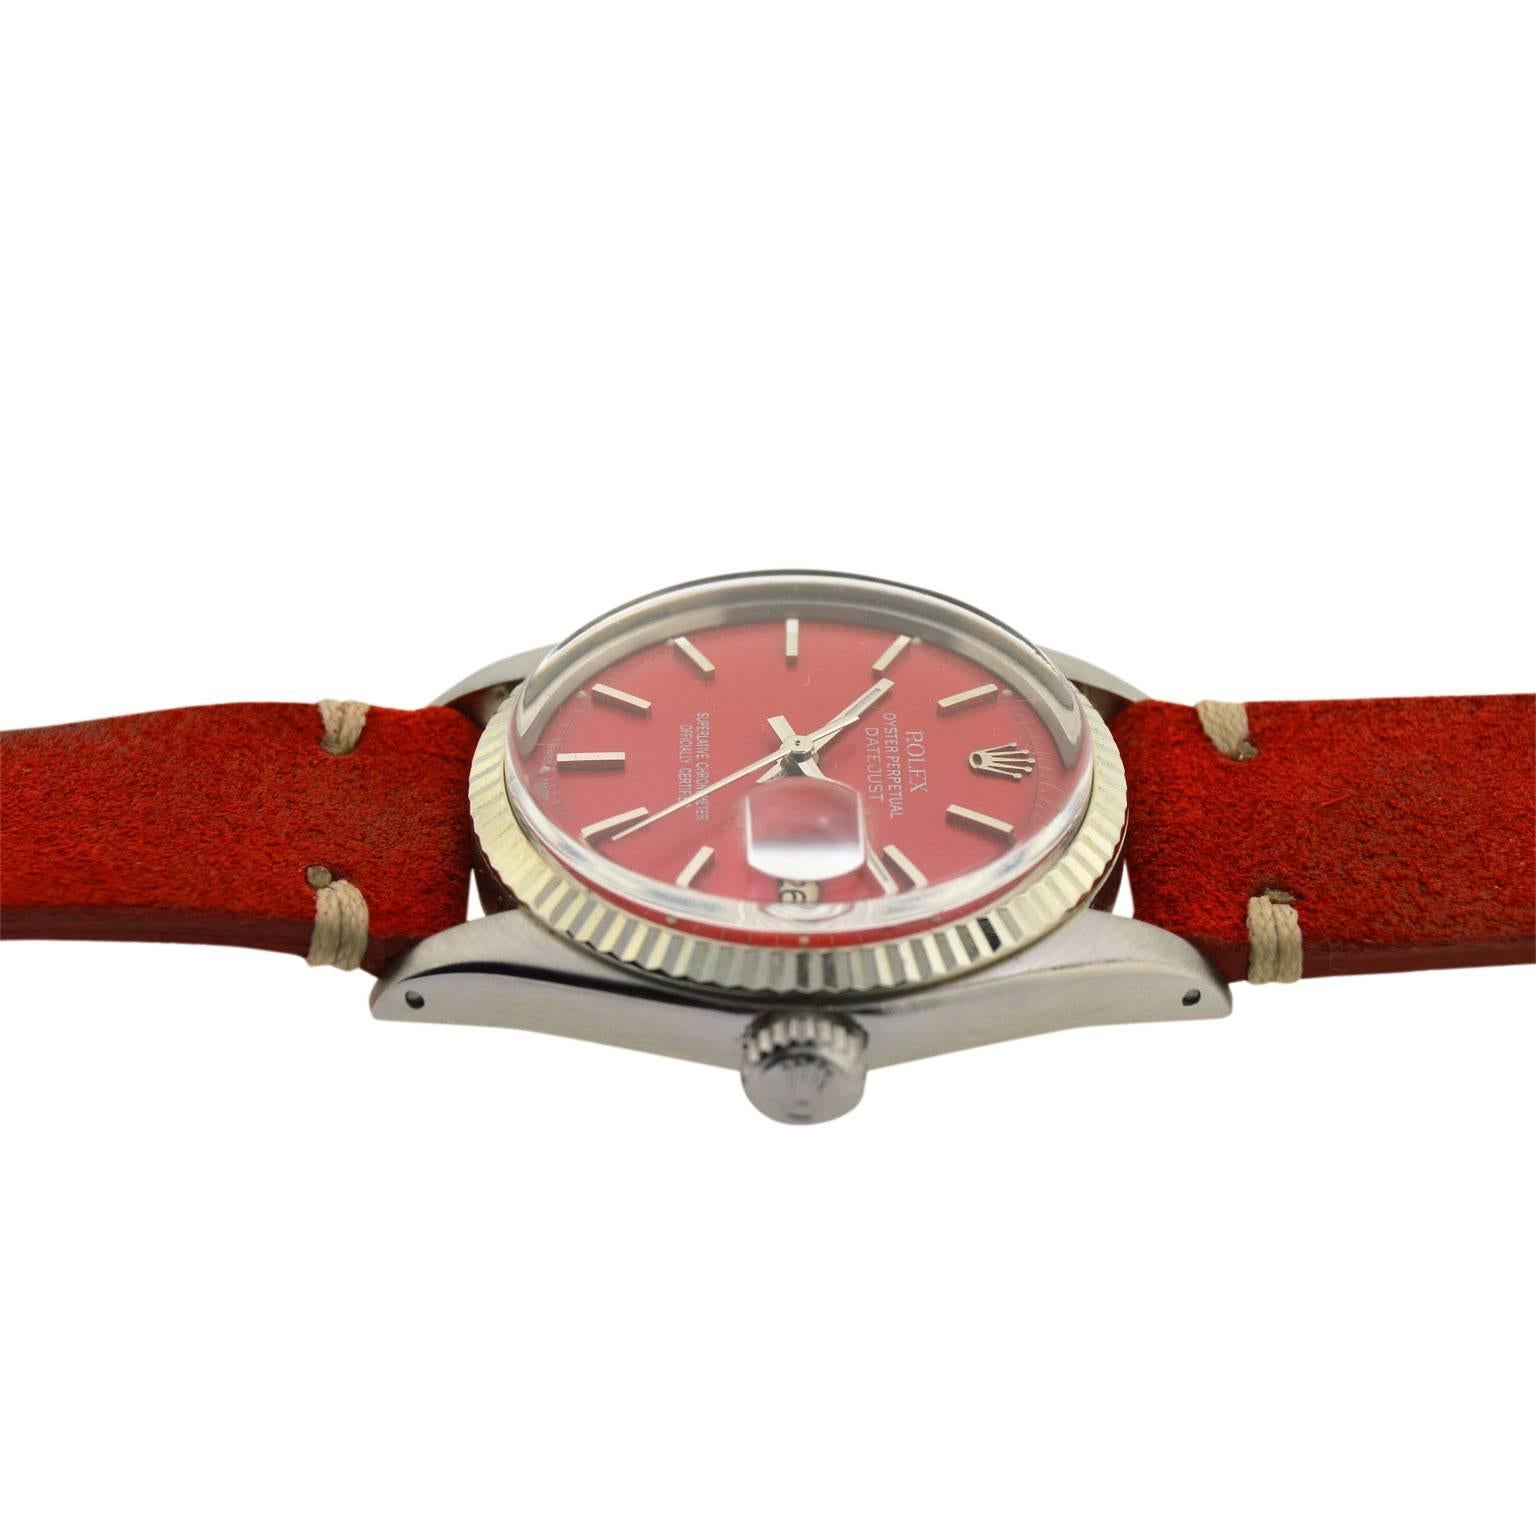 Rolex Stainless Steel Datejust Custom Red Dial Watch circa, 1970's In Excellent Condition For Sale In Long Beach, CA